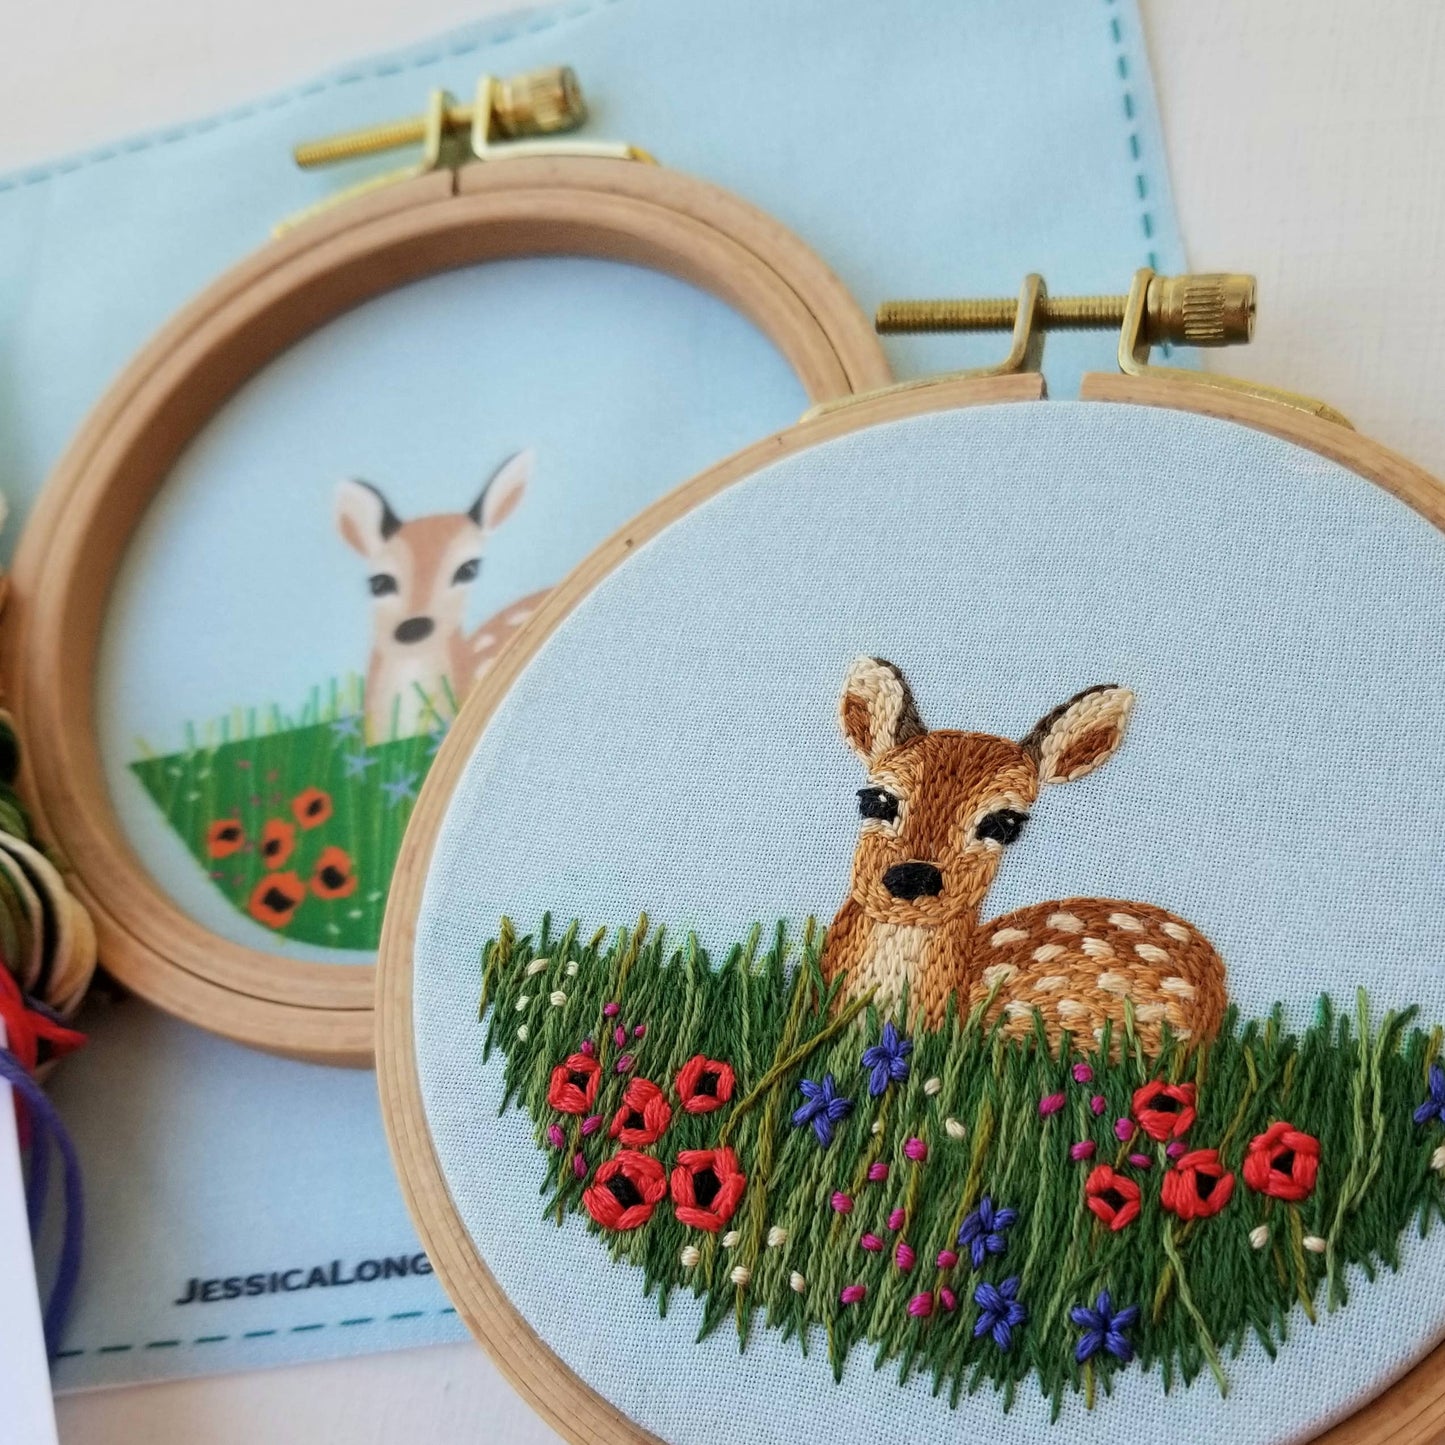 Wildflower Fawn Beginner Embroidery Kit | Jessica Long Embroider